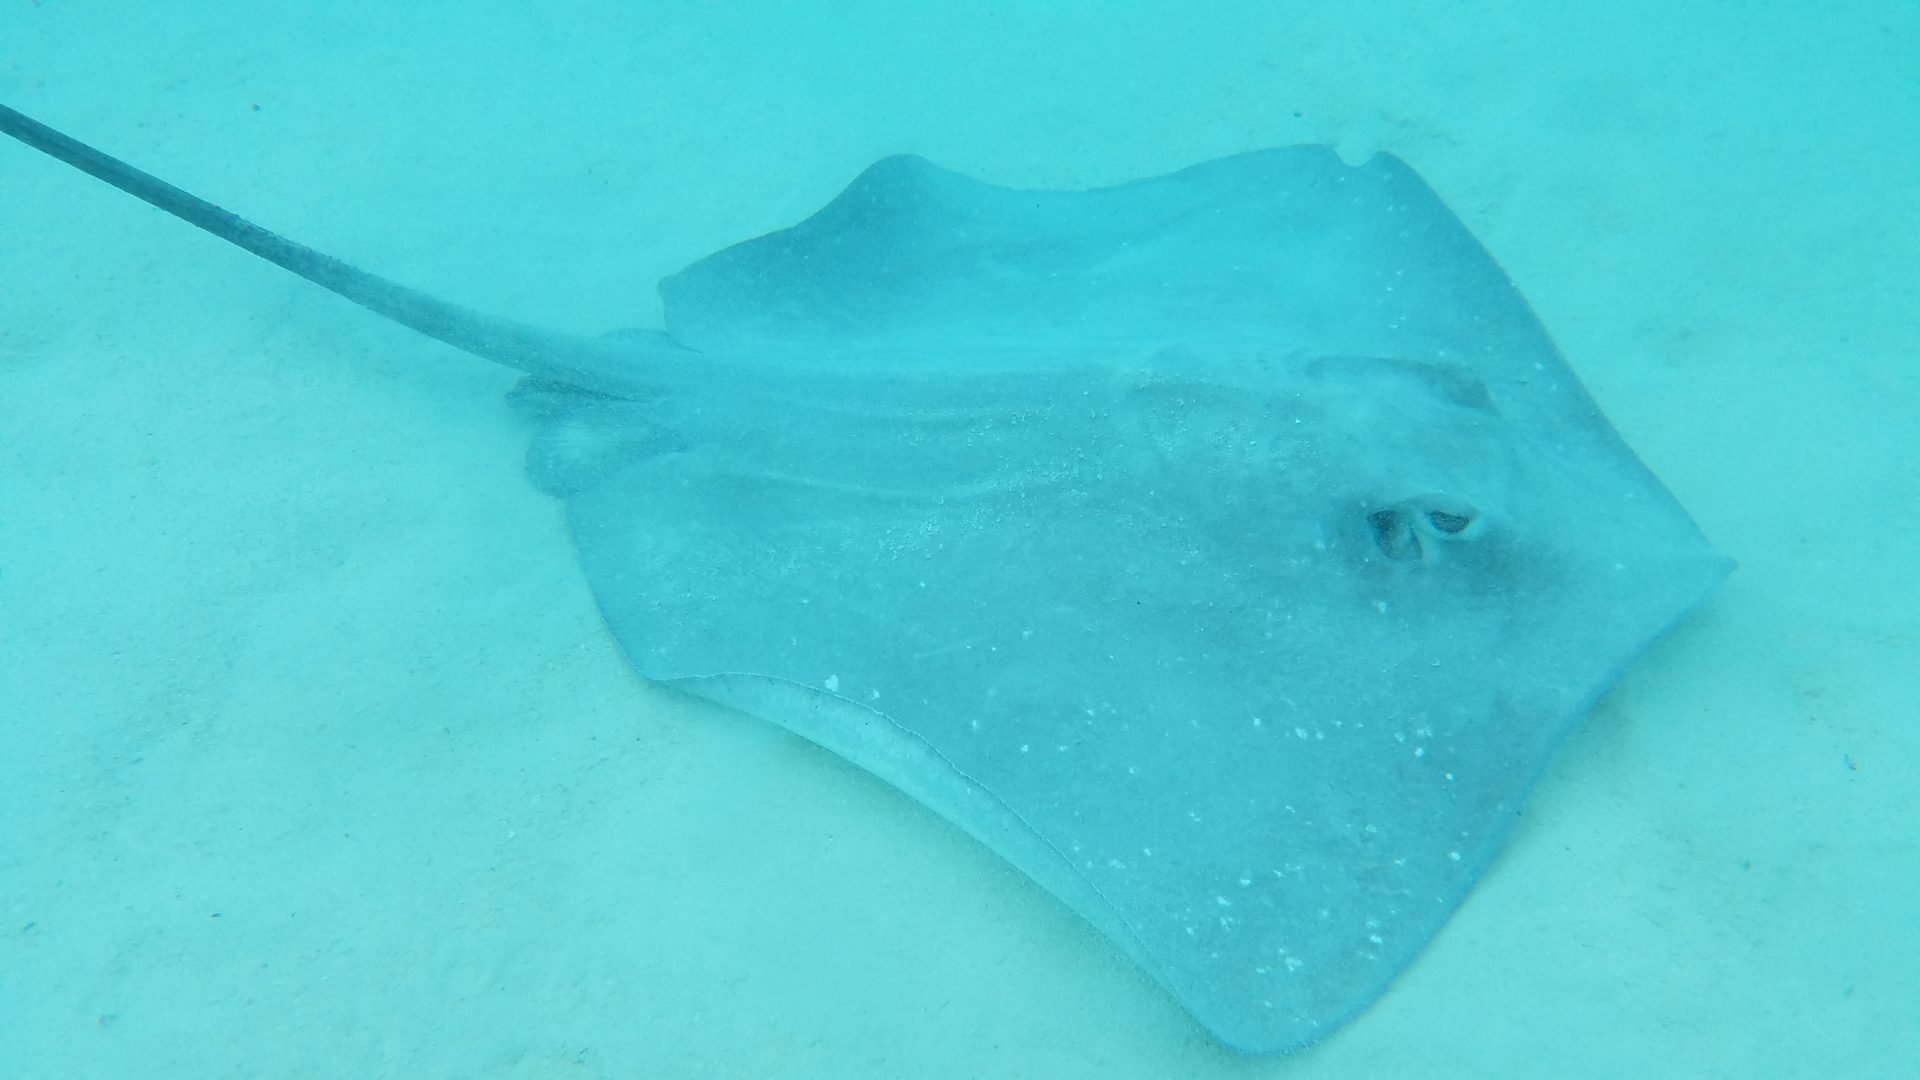 a stingray in the water